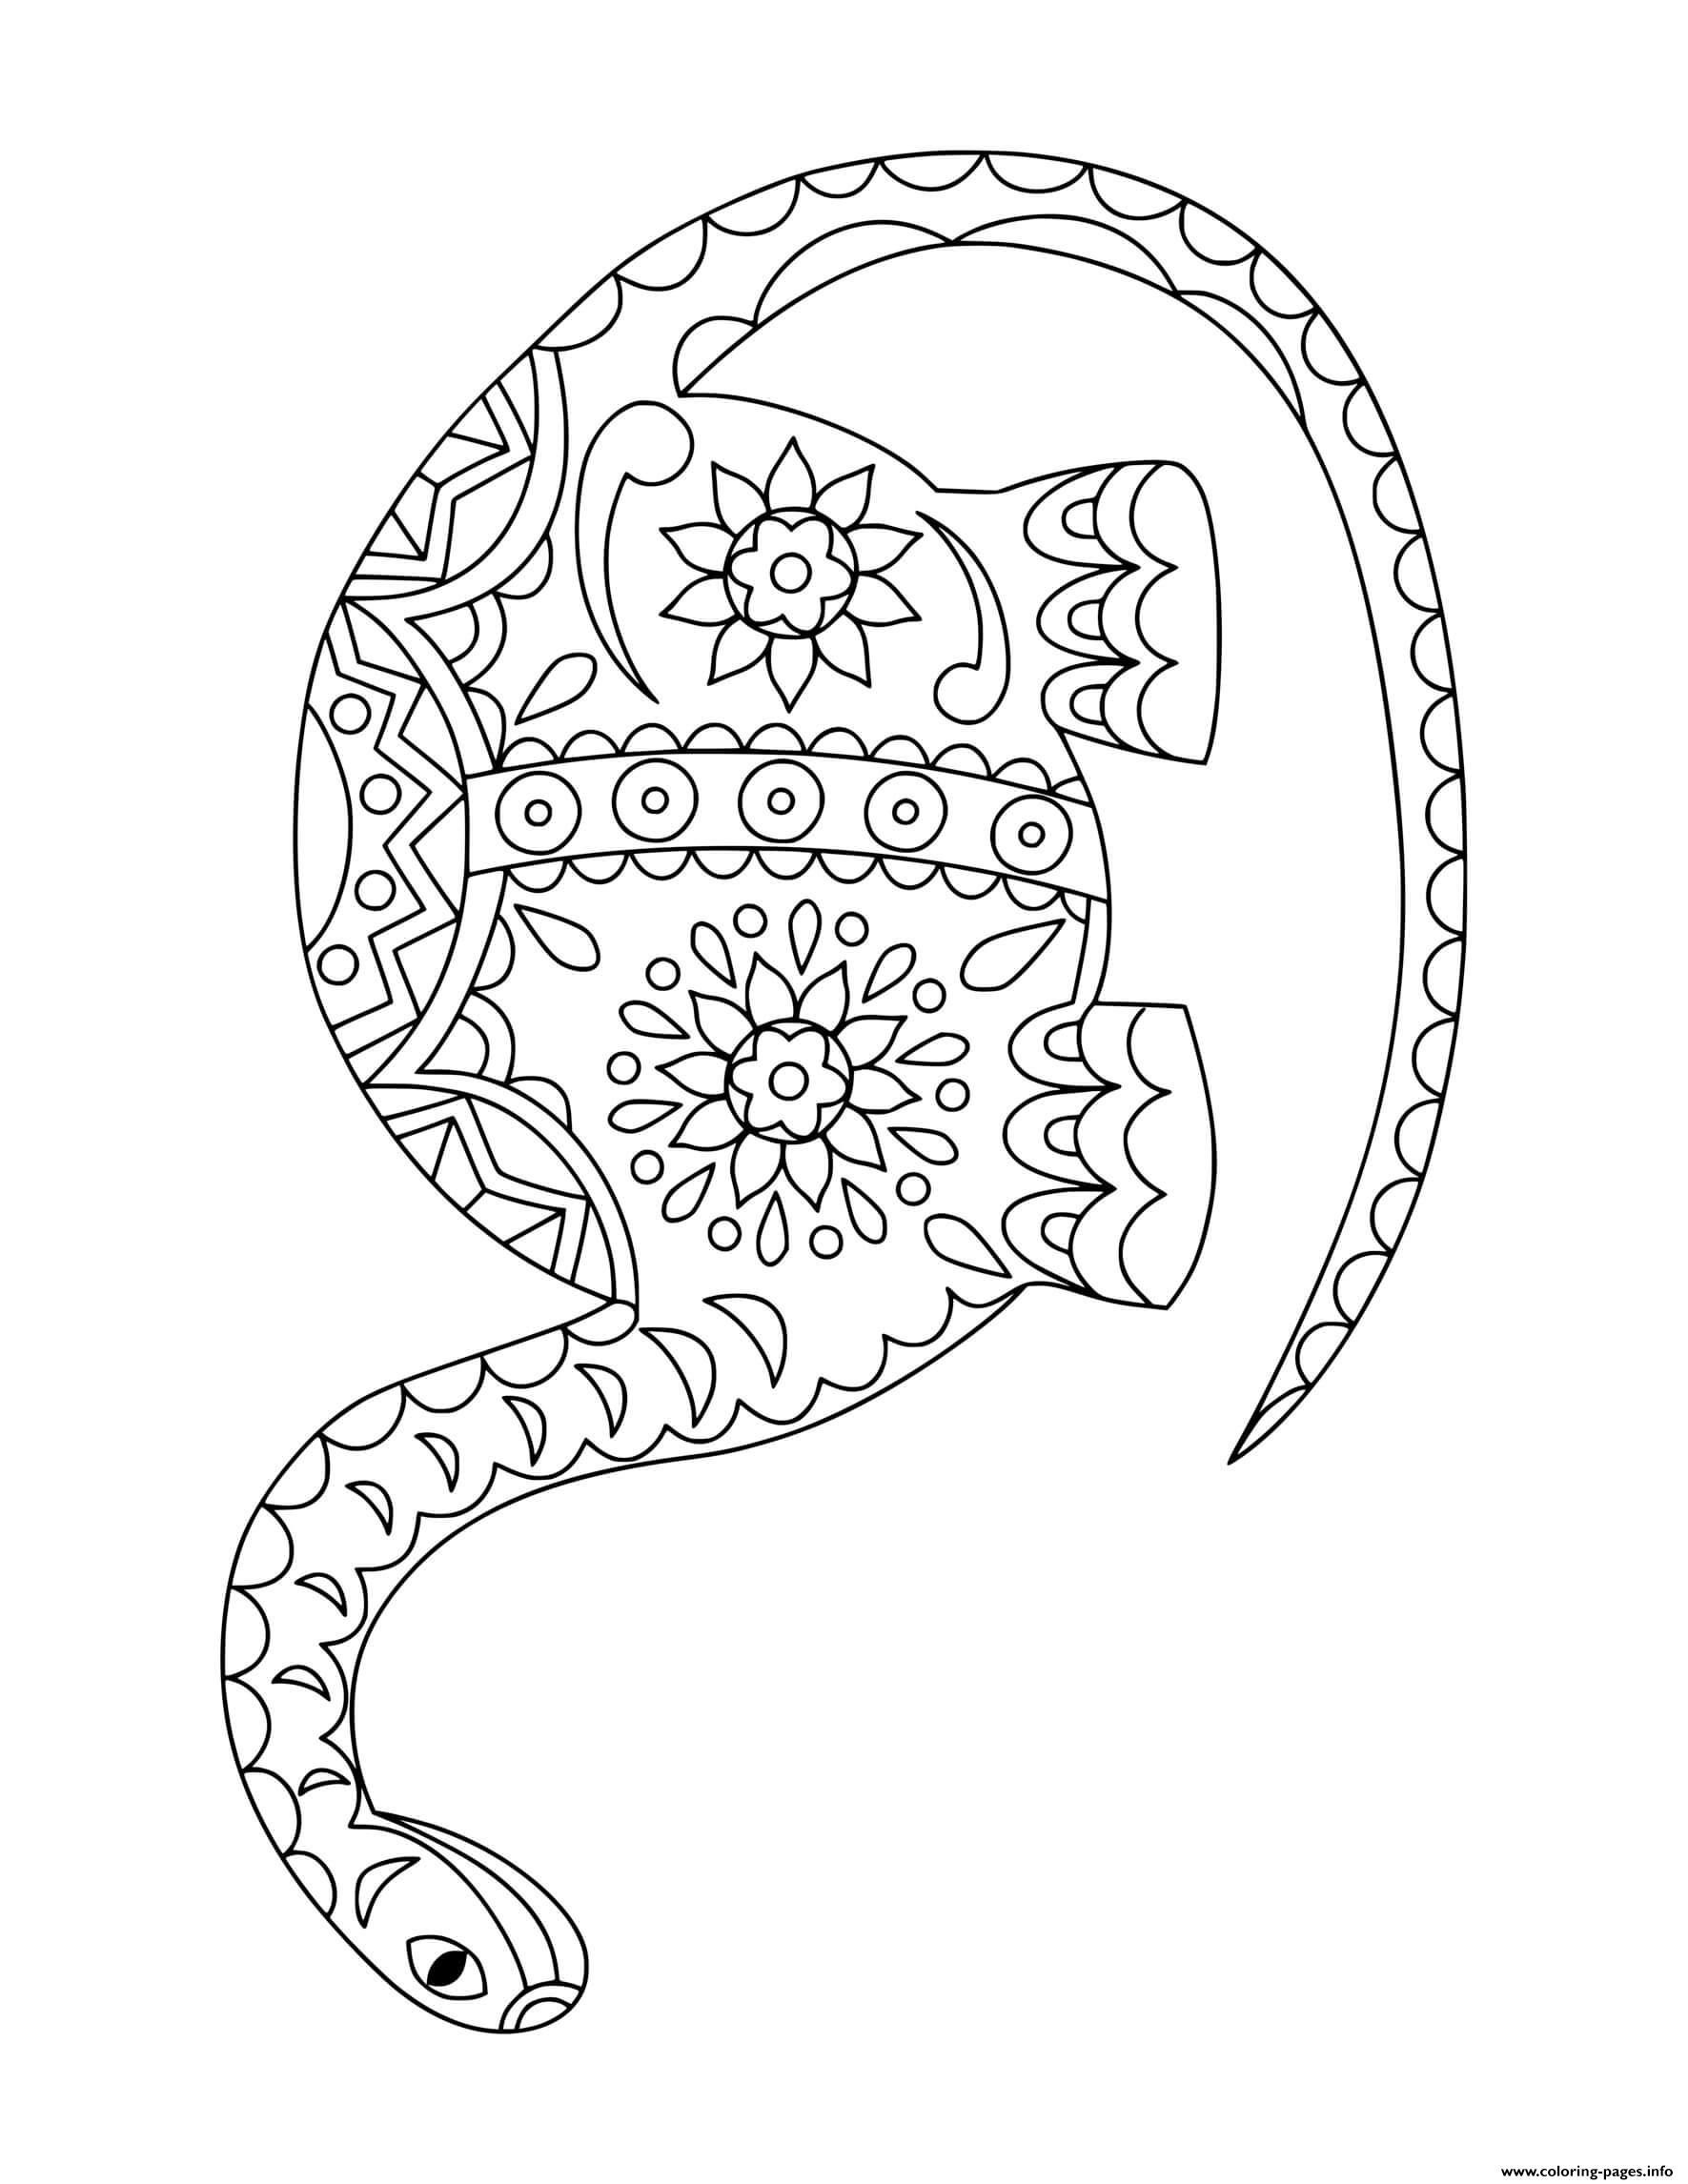 Dinosaur Intricate Pattern Doodle For Adults Coloring ...